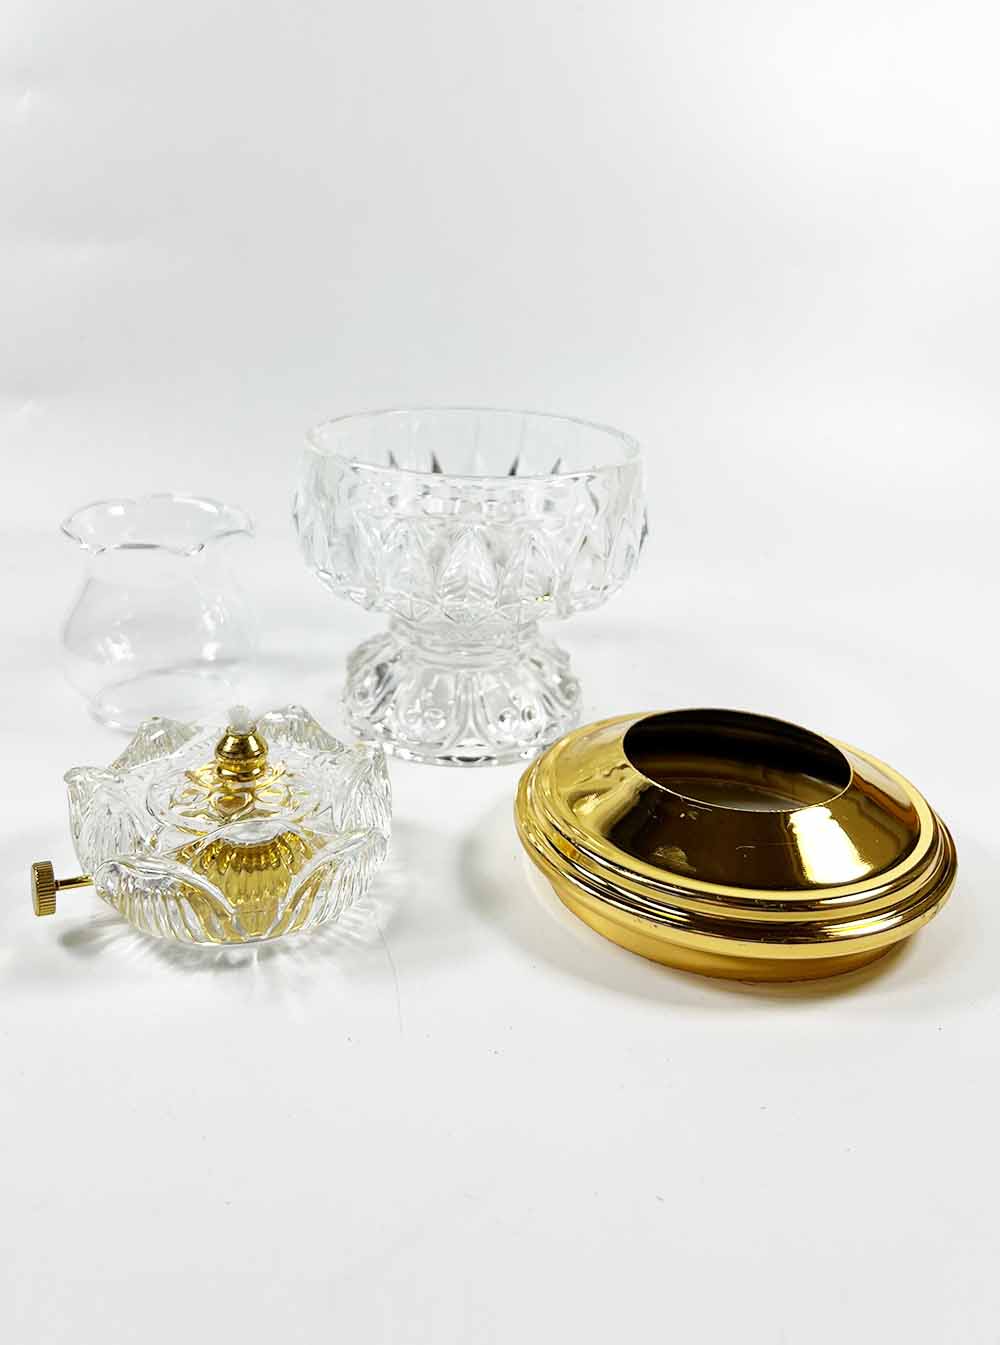 Lotus-shaped Oil Lamp with Gold Cover